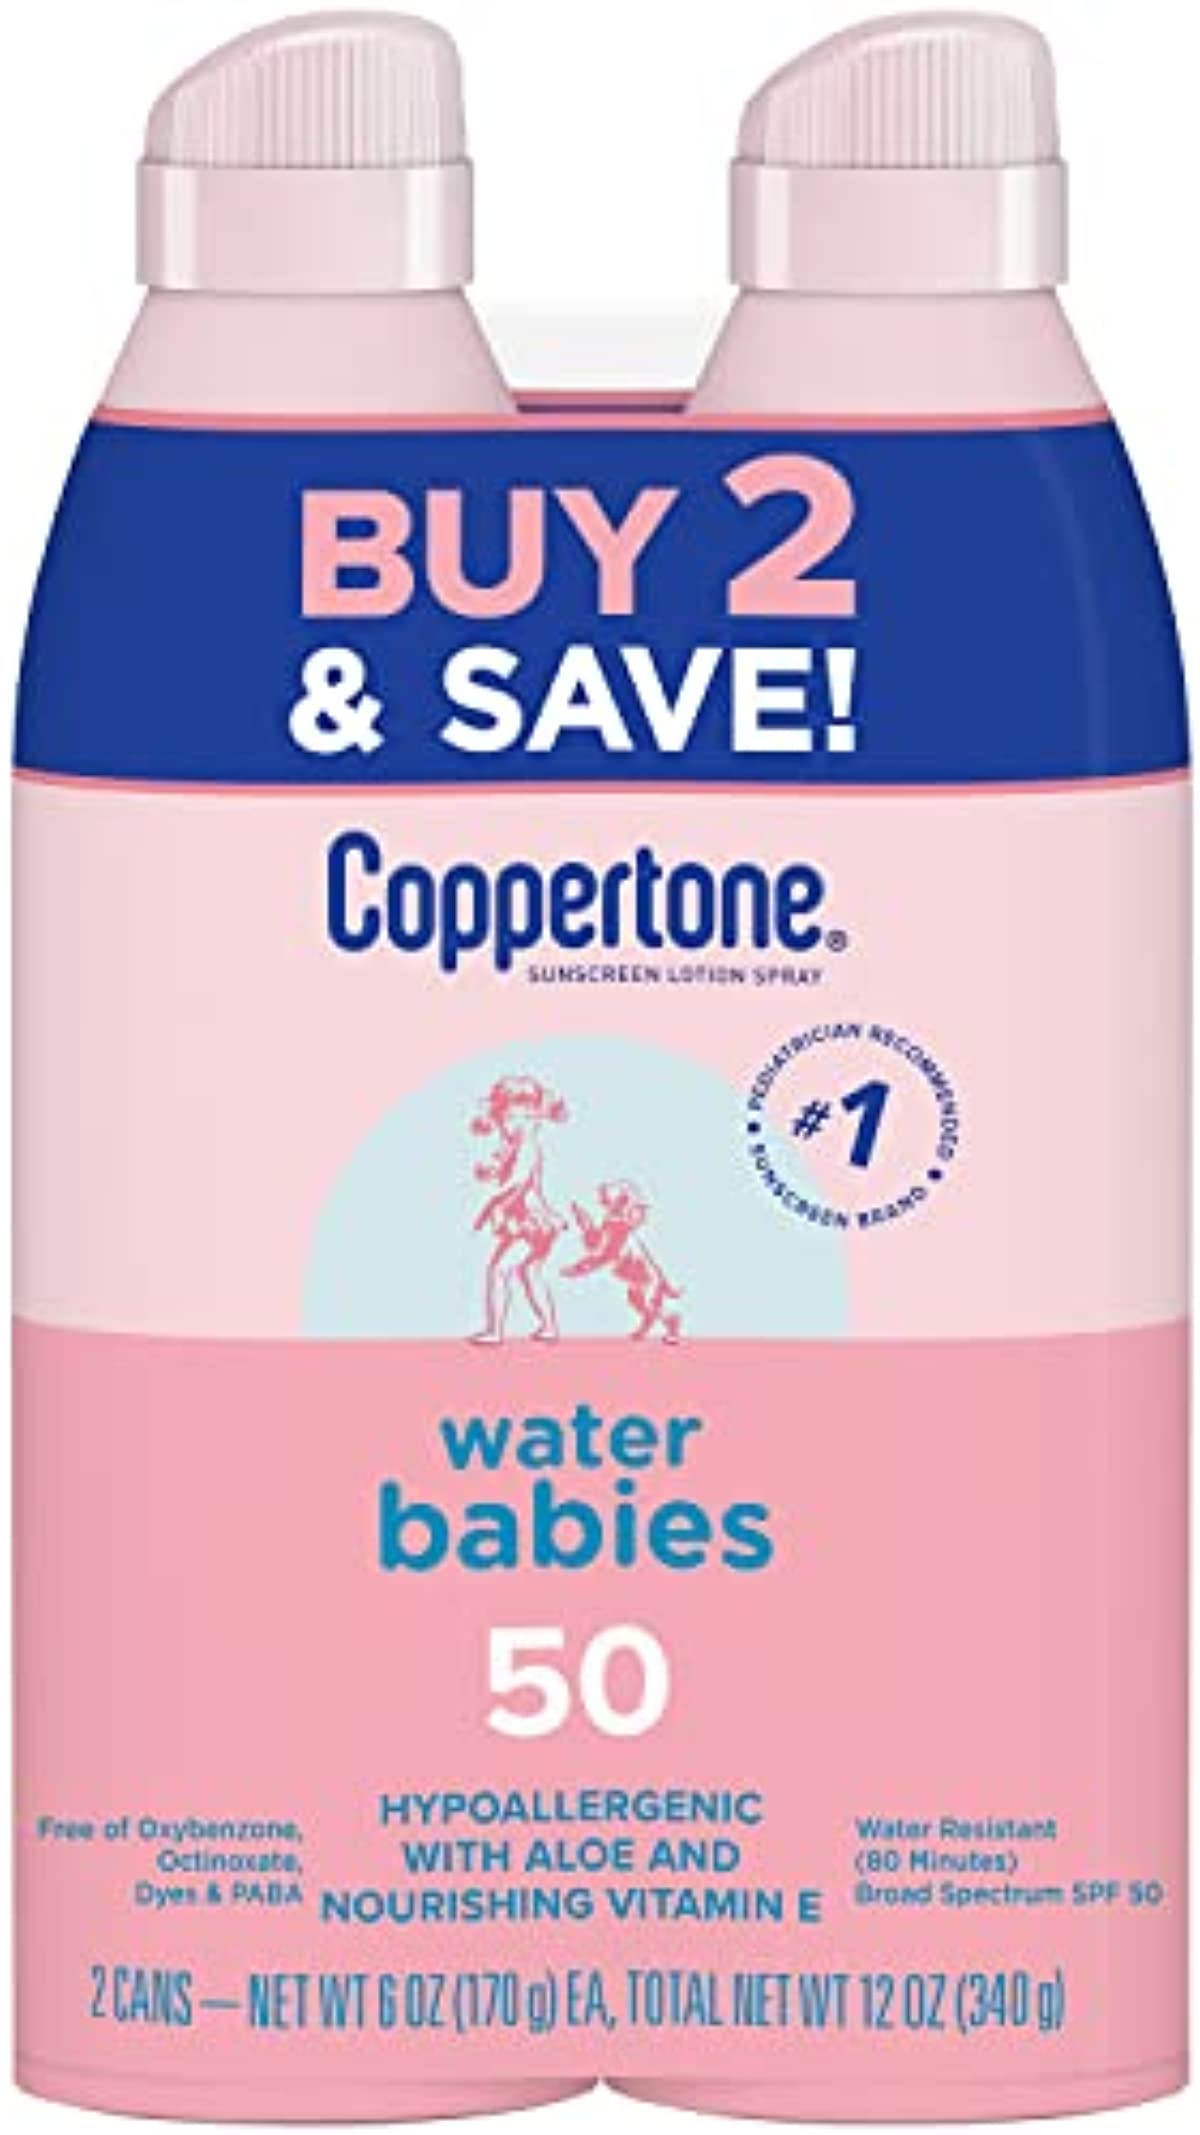 Coppertone Water Babies Sunscreen Lotion Spray SPF 50, Pediatrician Recommended Baby Sunscreen Spray, Water Resistant Sunscreen for Babies, 6 Oz Spray, Pack of 2